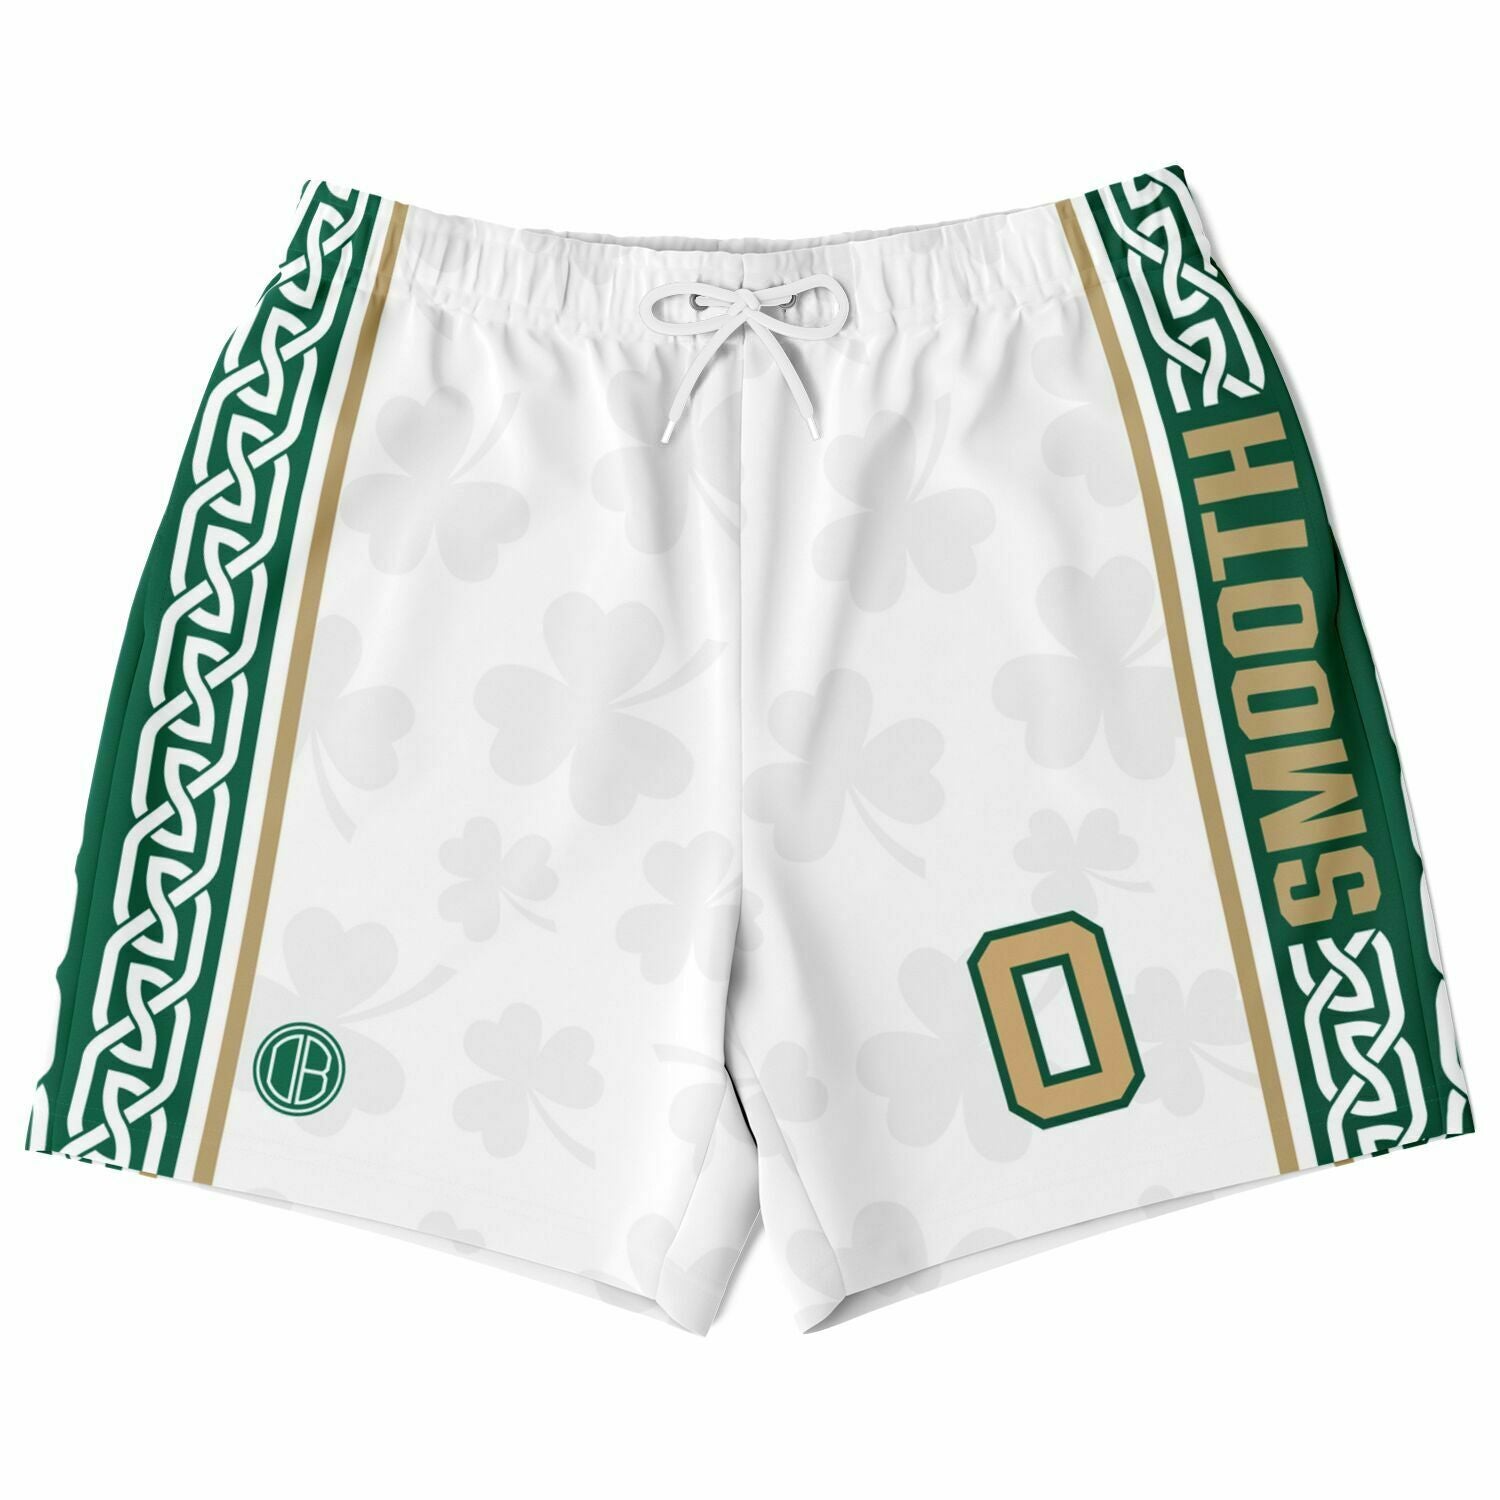 DearBBall Fashion Short - SMOOTH 0 Clovers White Edition (Subli) 